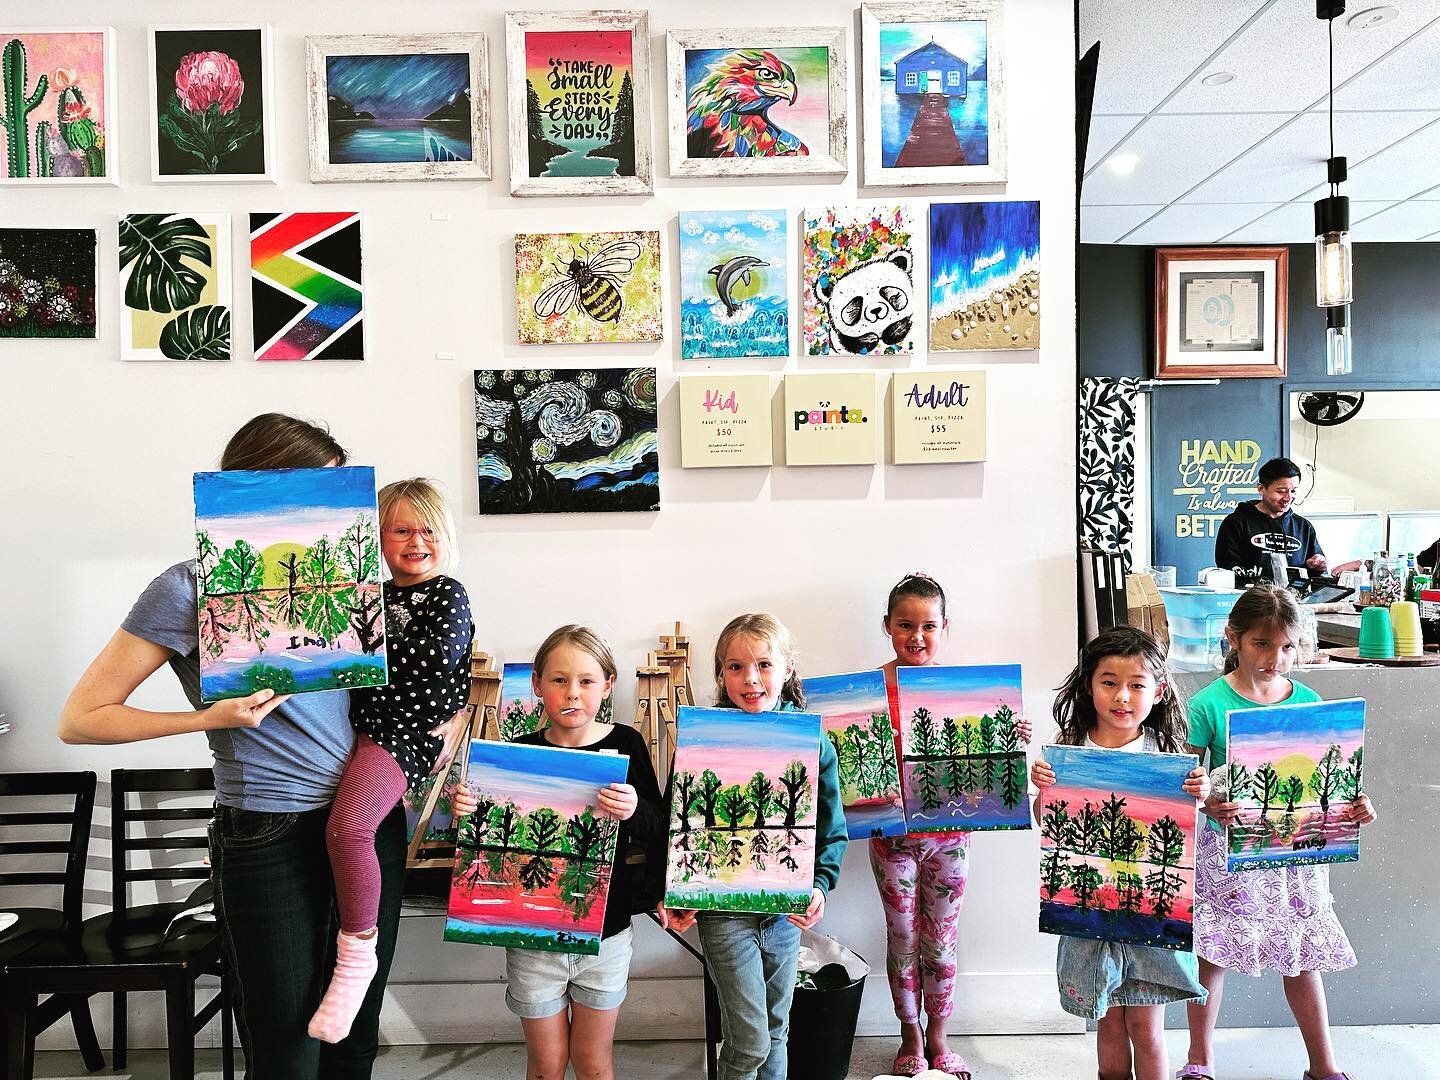 🍂📸 Capturing memories of our leaf printing adventure! 🌿✨ Here's a group shot of our talented young artists proudly displaying their nature-inspired masterpieces. 🎨🌱 Together, we're creating beautiful art while appreciating the beauty of our natu